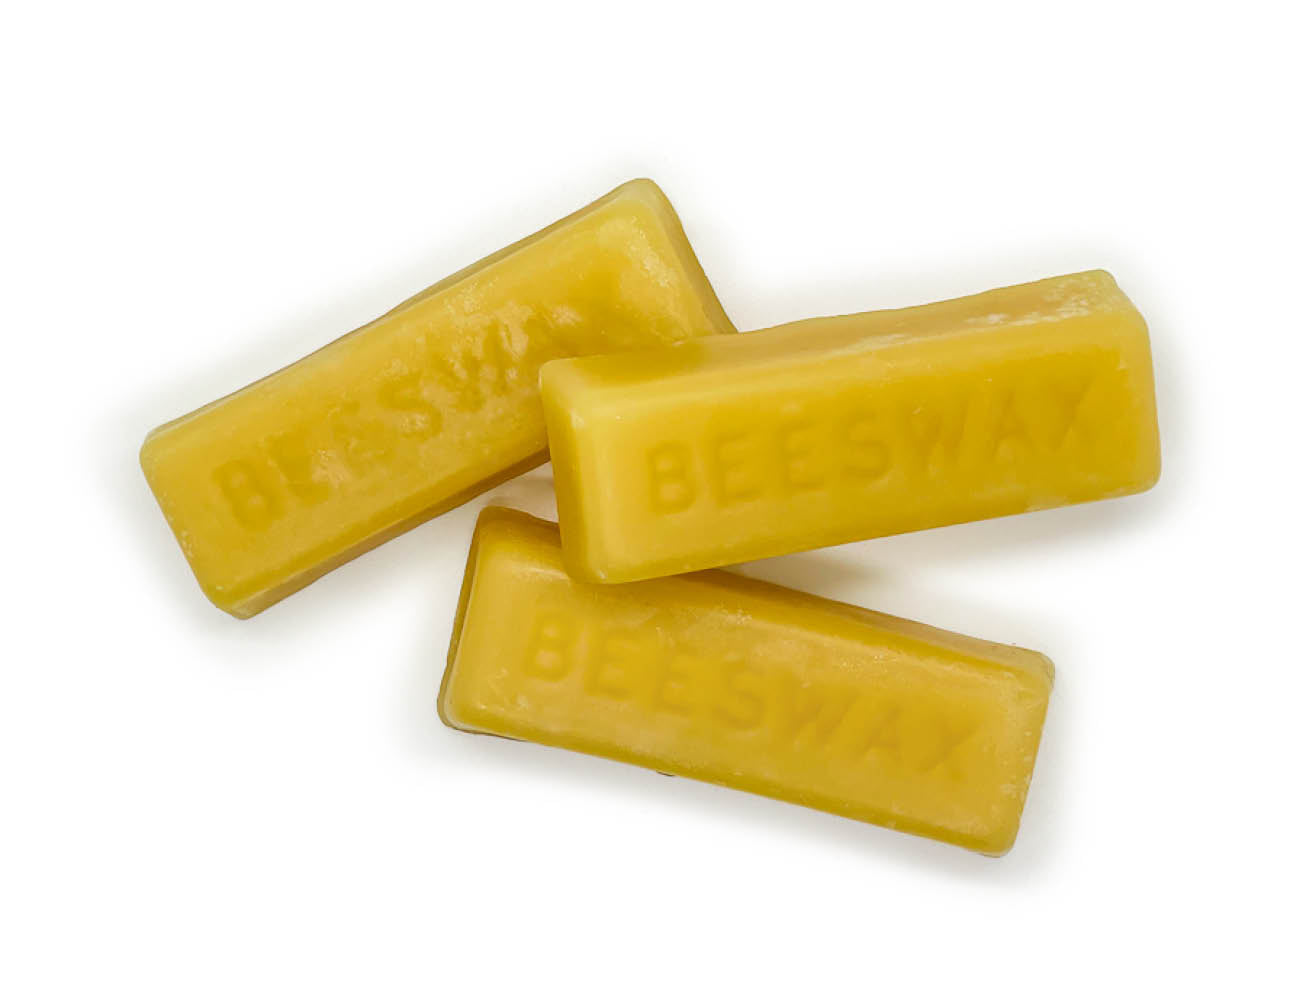 1 Oz Pure Beeswax Bar at Whole Foods Market